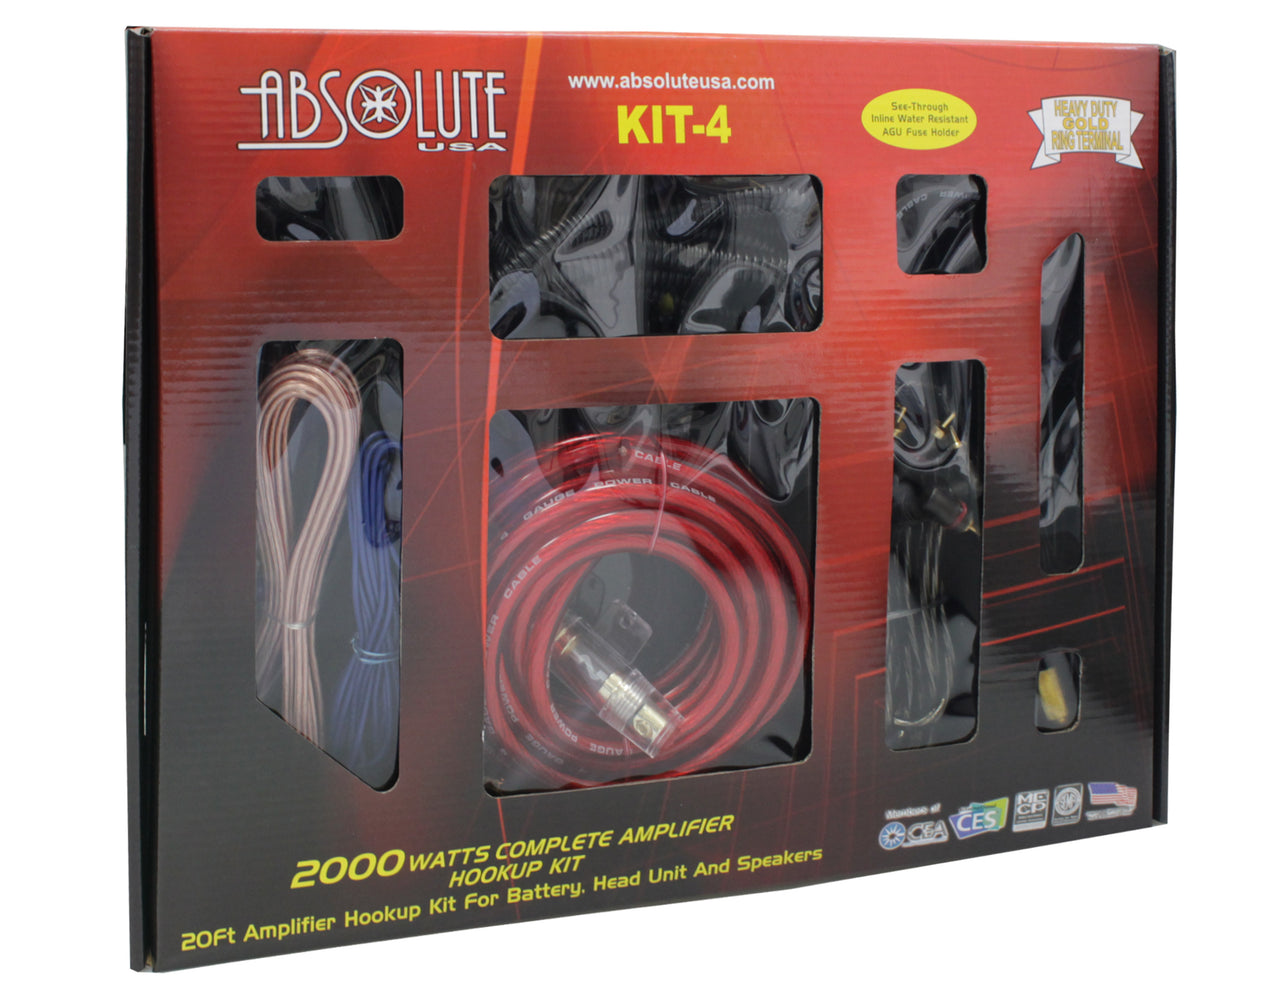 Absolute 2000W KIT-4 Gauge Amp Kit Amplifier Install Wiring Complete 4 Ga Car Wires Red